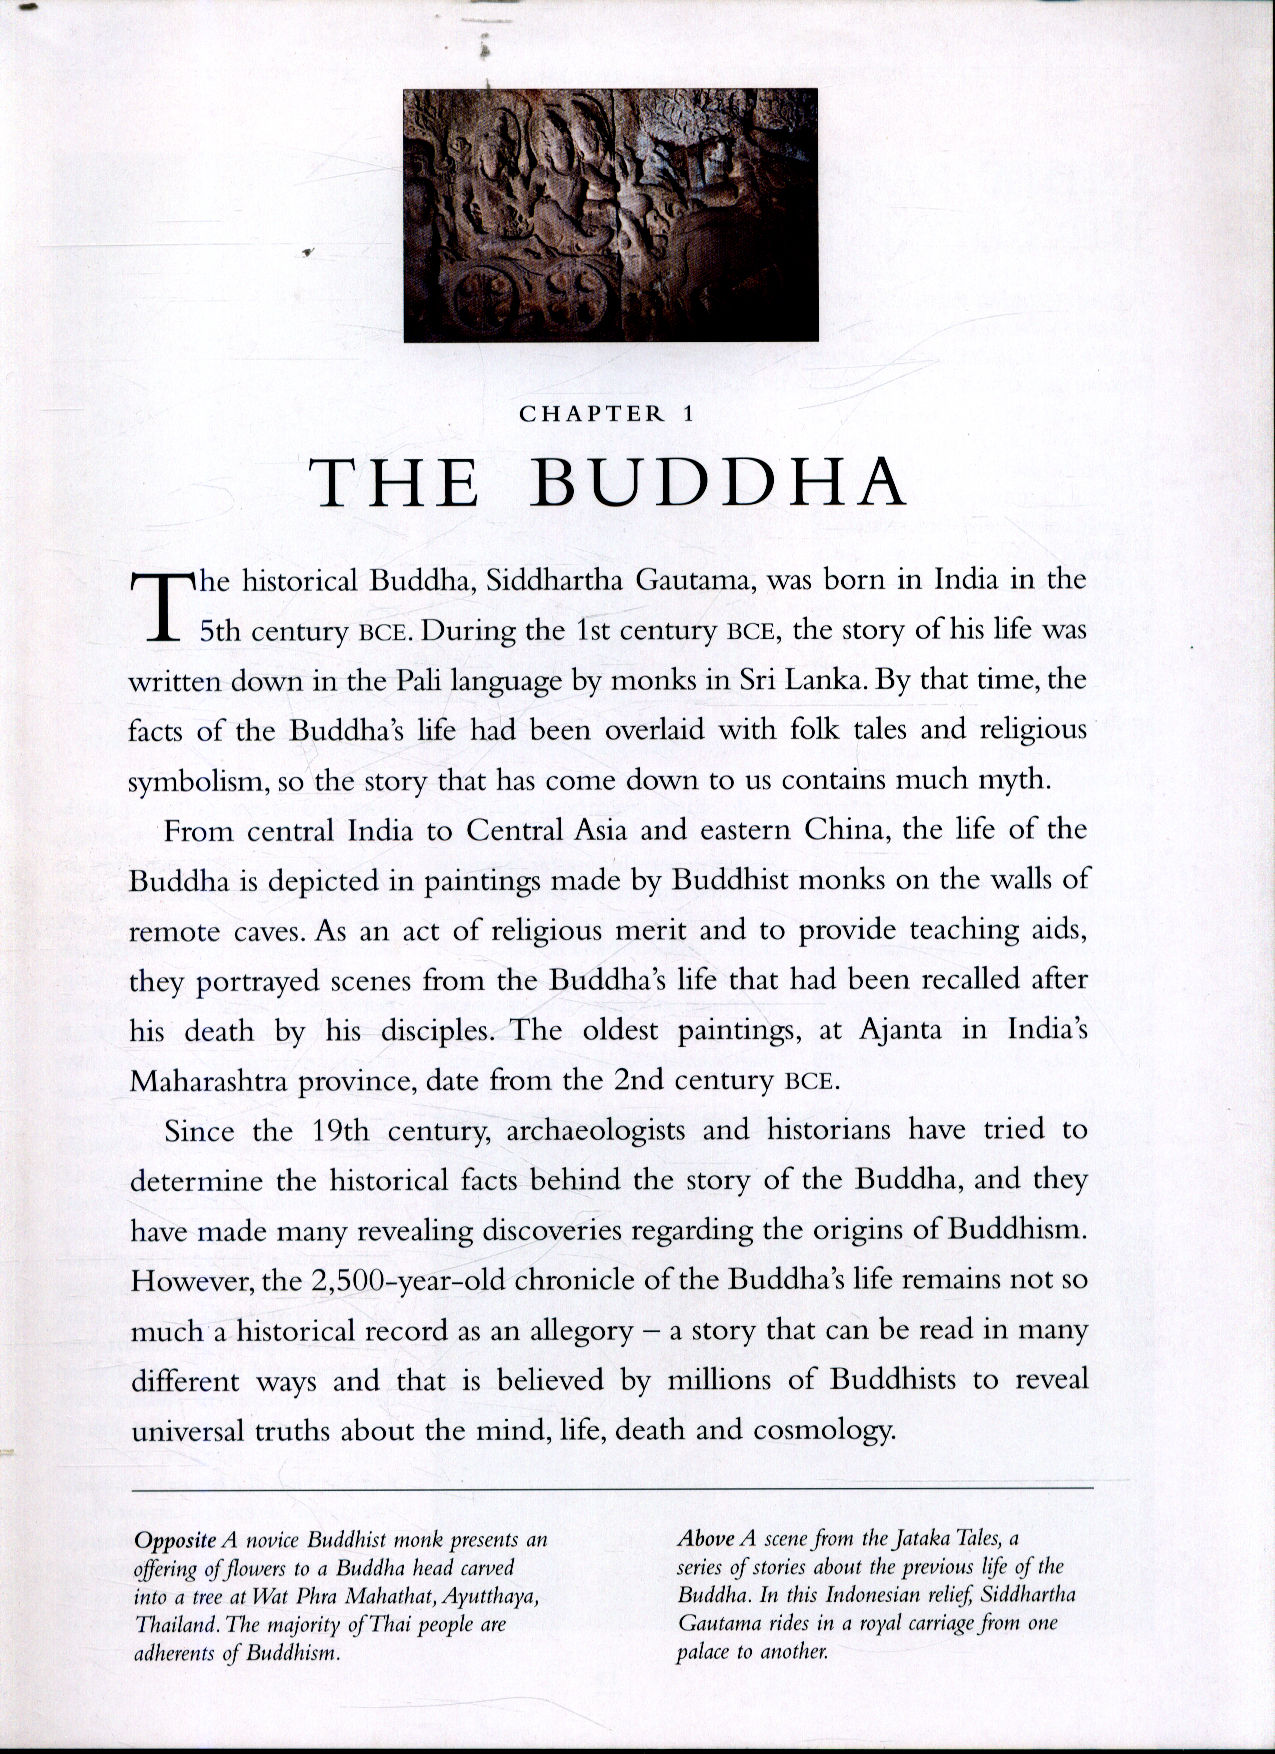 good essay topics about buddhism